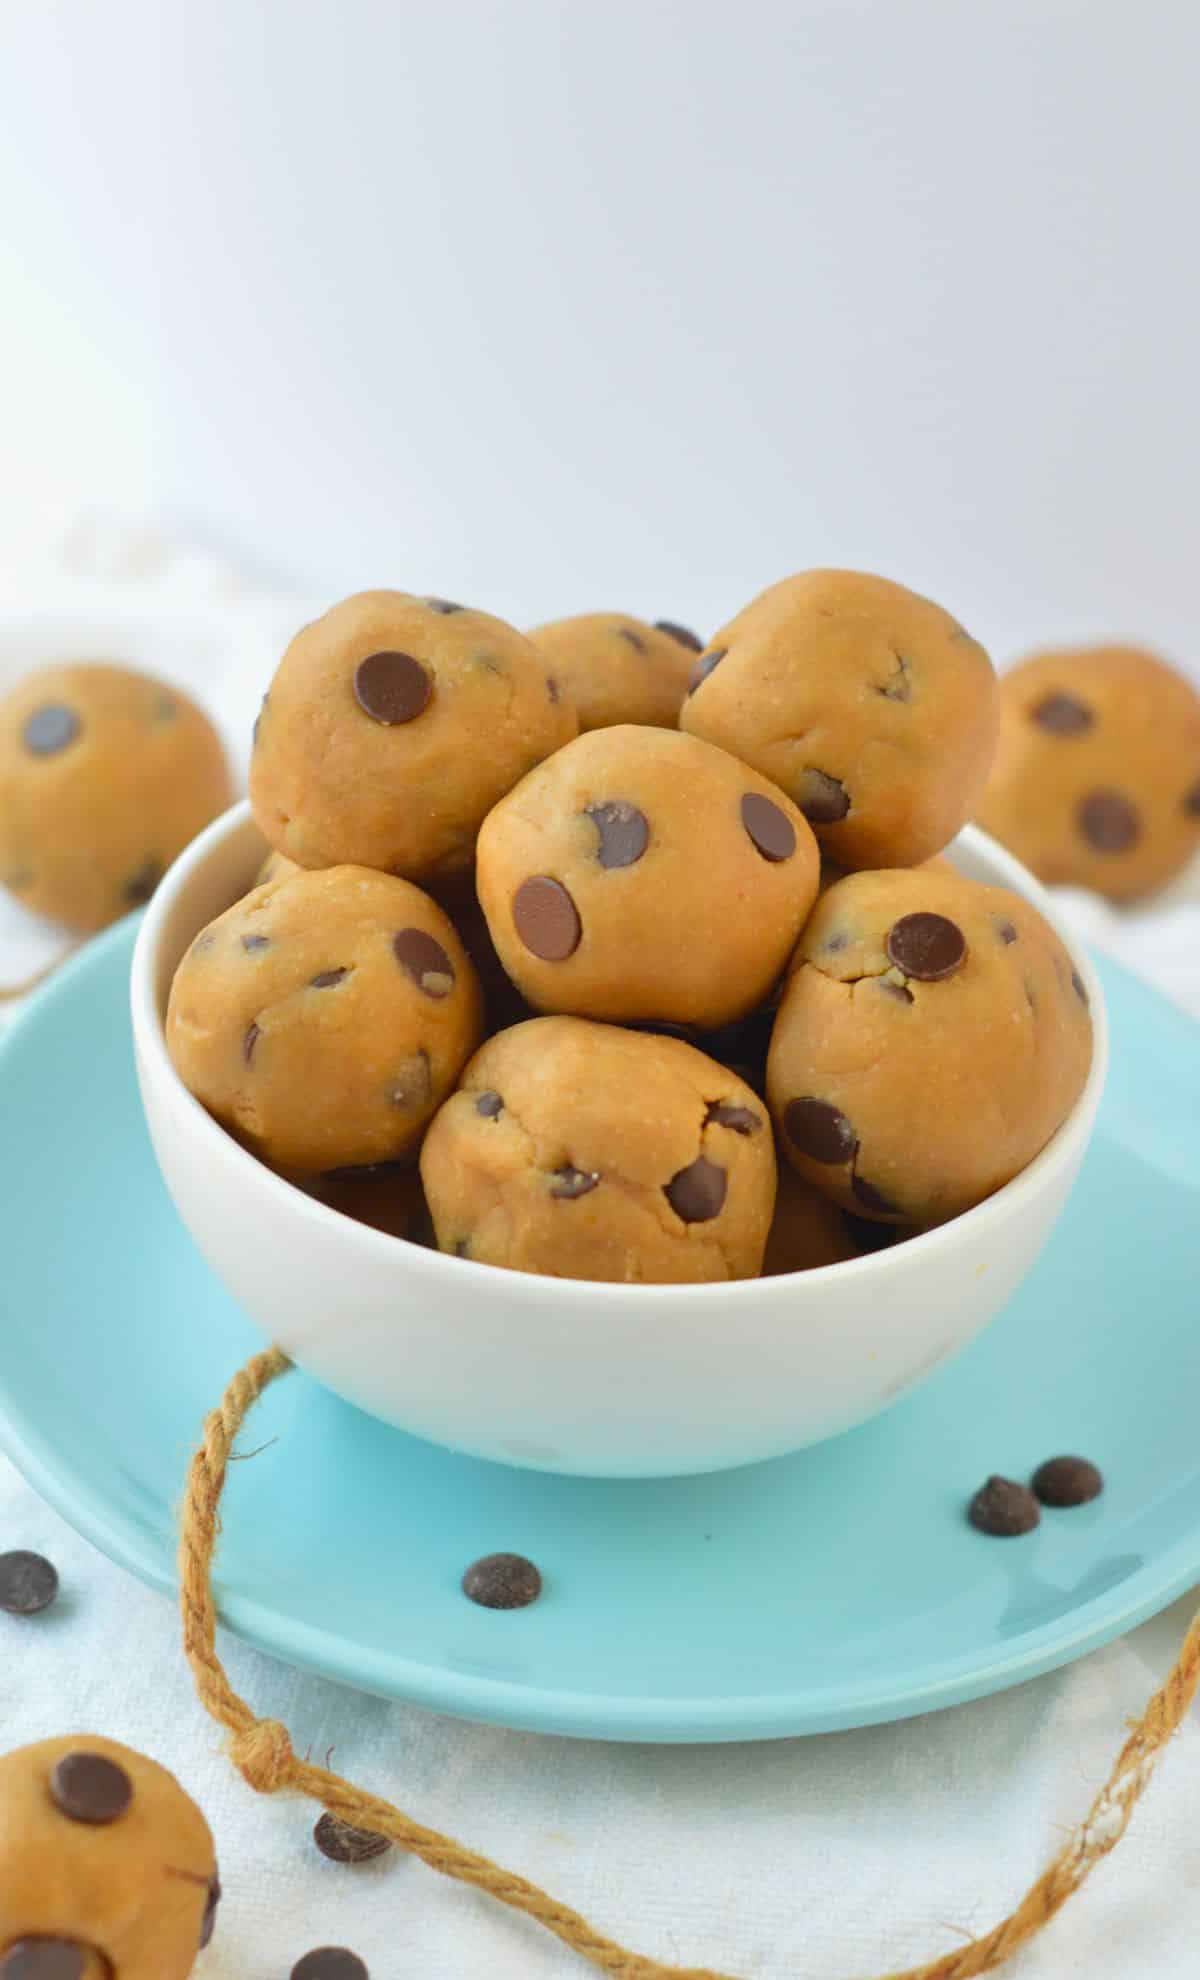 Vegan Cookie Dough Balls in a small bowl on a blue plate.